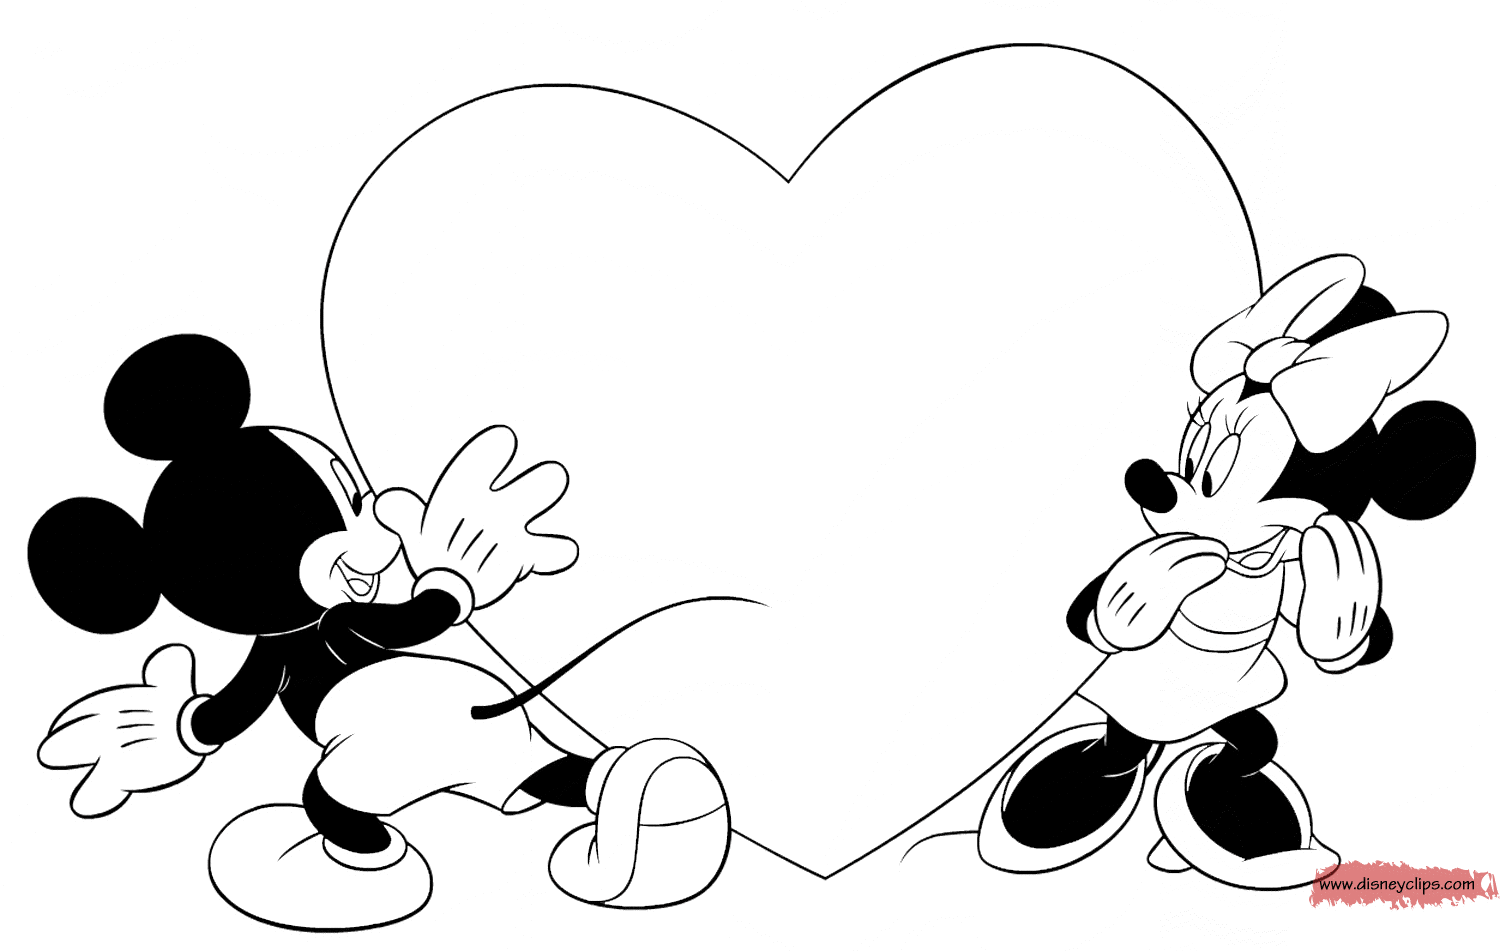 disney-valentine-s-day-coloring-pages-2-disneyclips